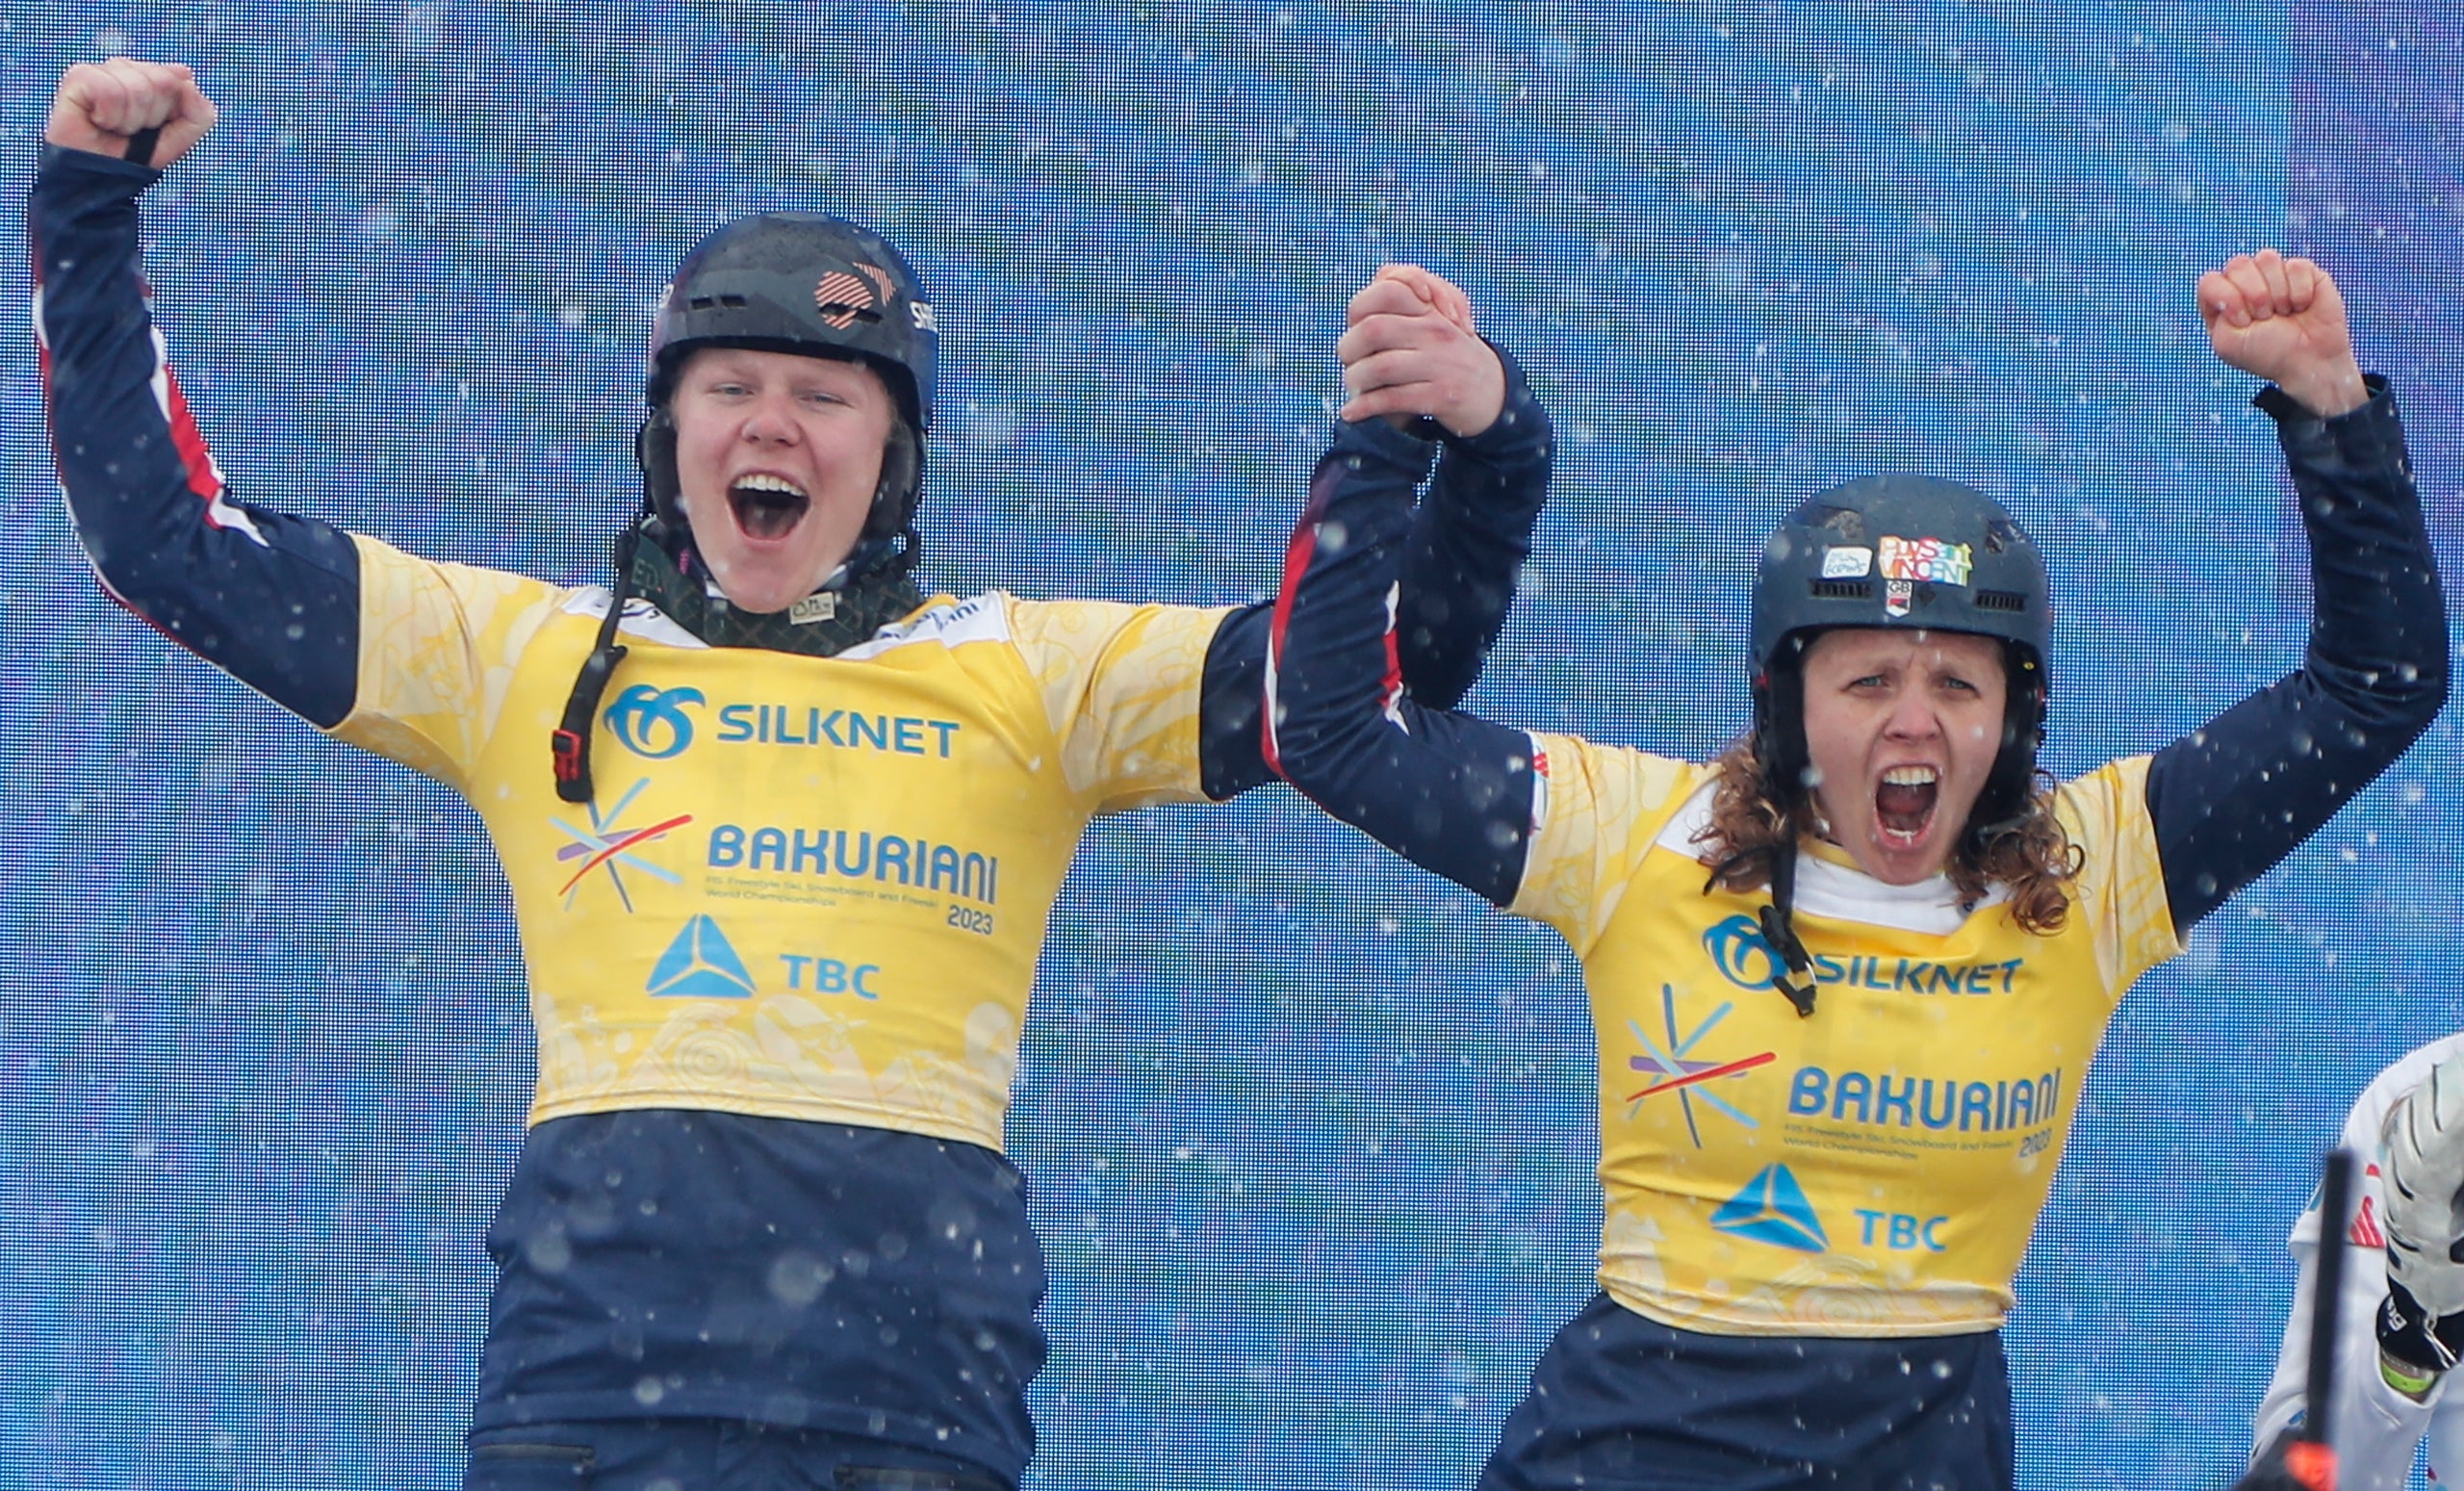 Charlotte Bankes and Huw Nightingale stunned the world to take mixed snowboard cross gold